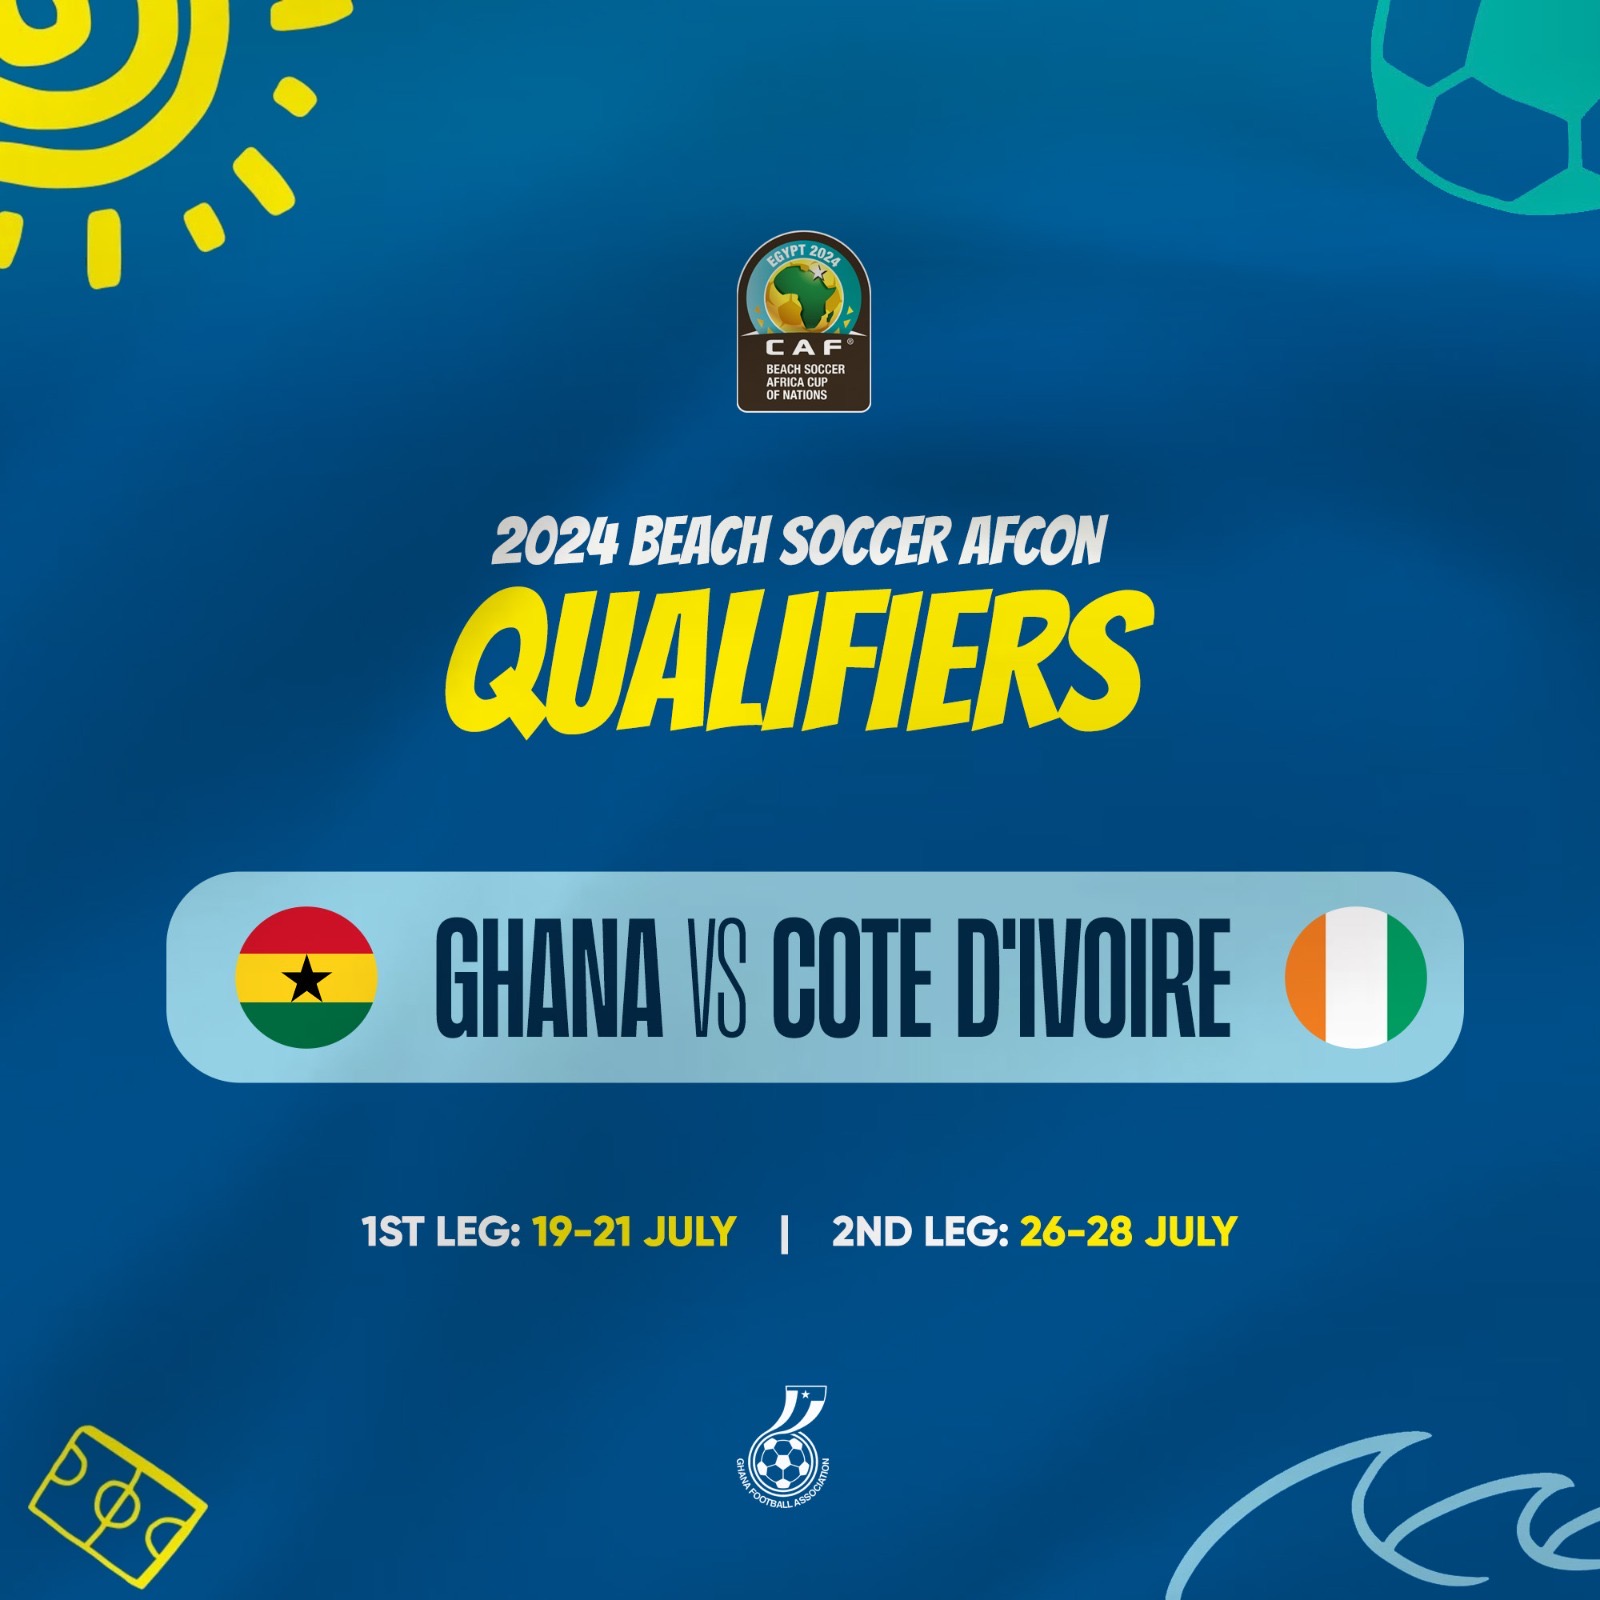 Ghana set for thrilling showdown against Cote D'Ivoire in 2024 Beach Soccer AFCON Qualifiers